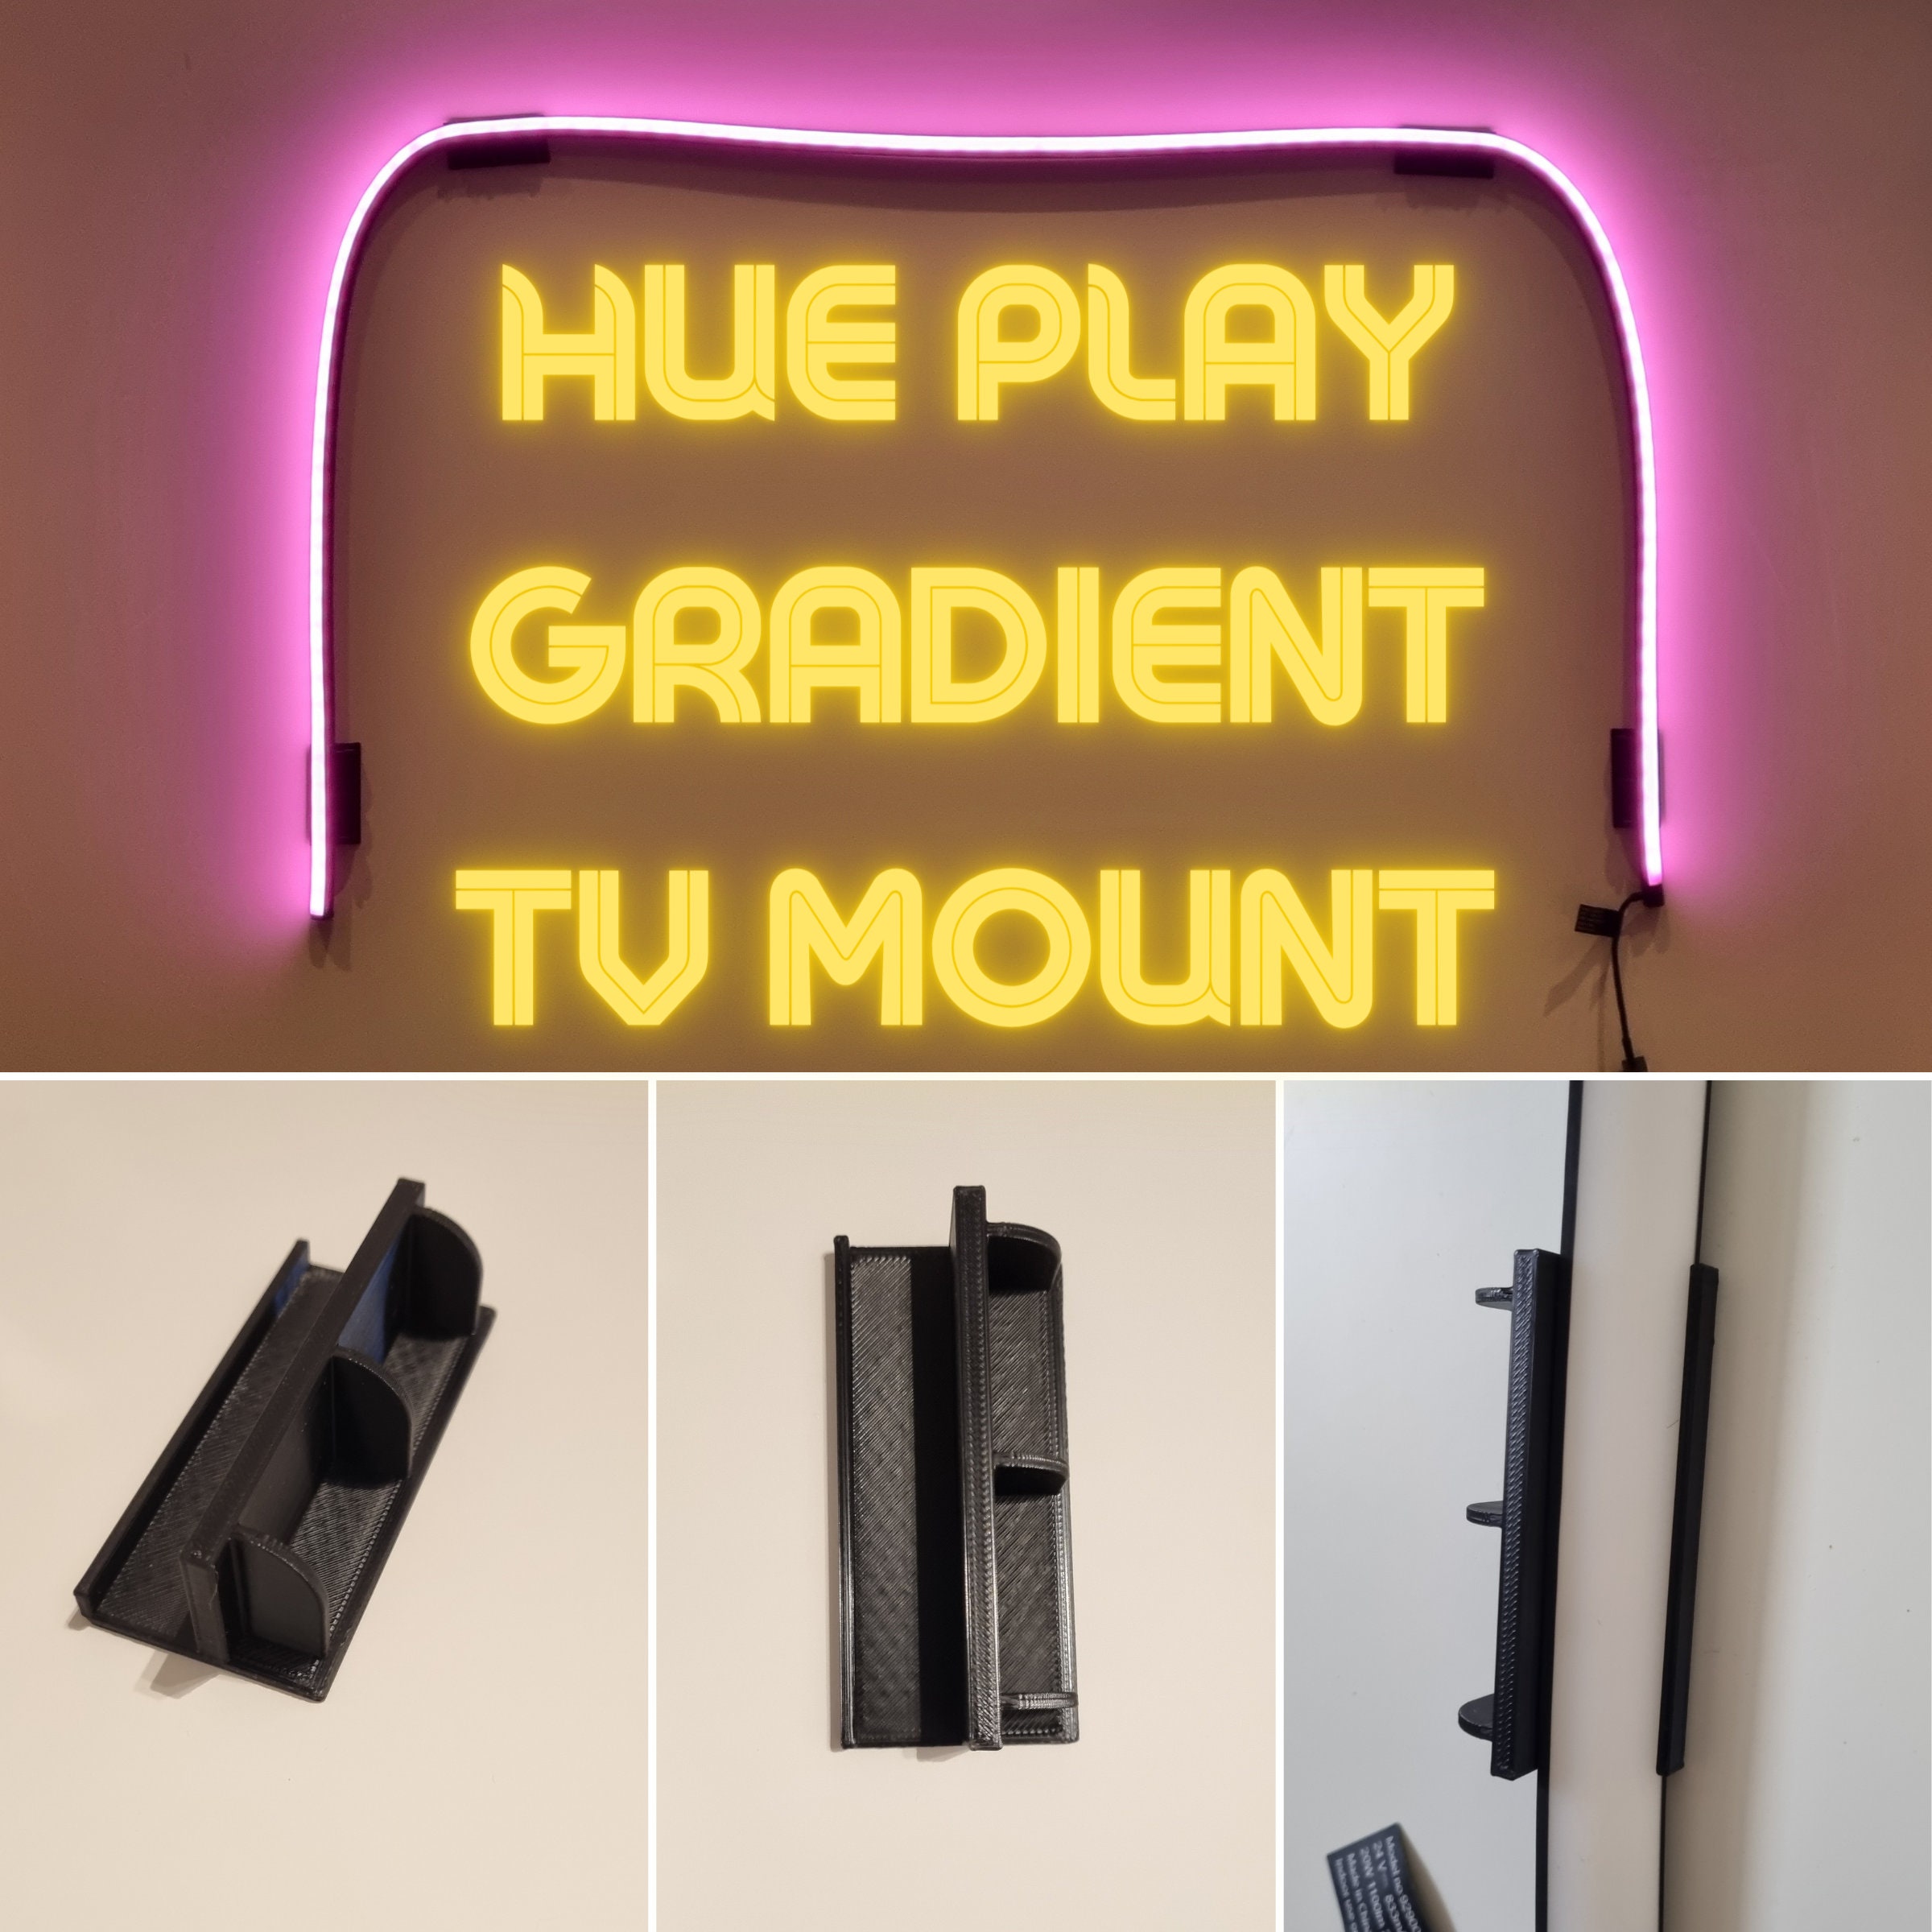 TV / Monitor Mount for Hue Play - compatible with VESA 100 200 300 400  spacing